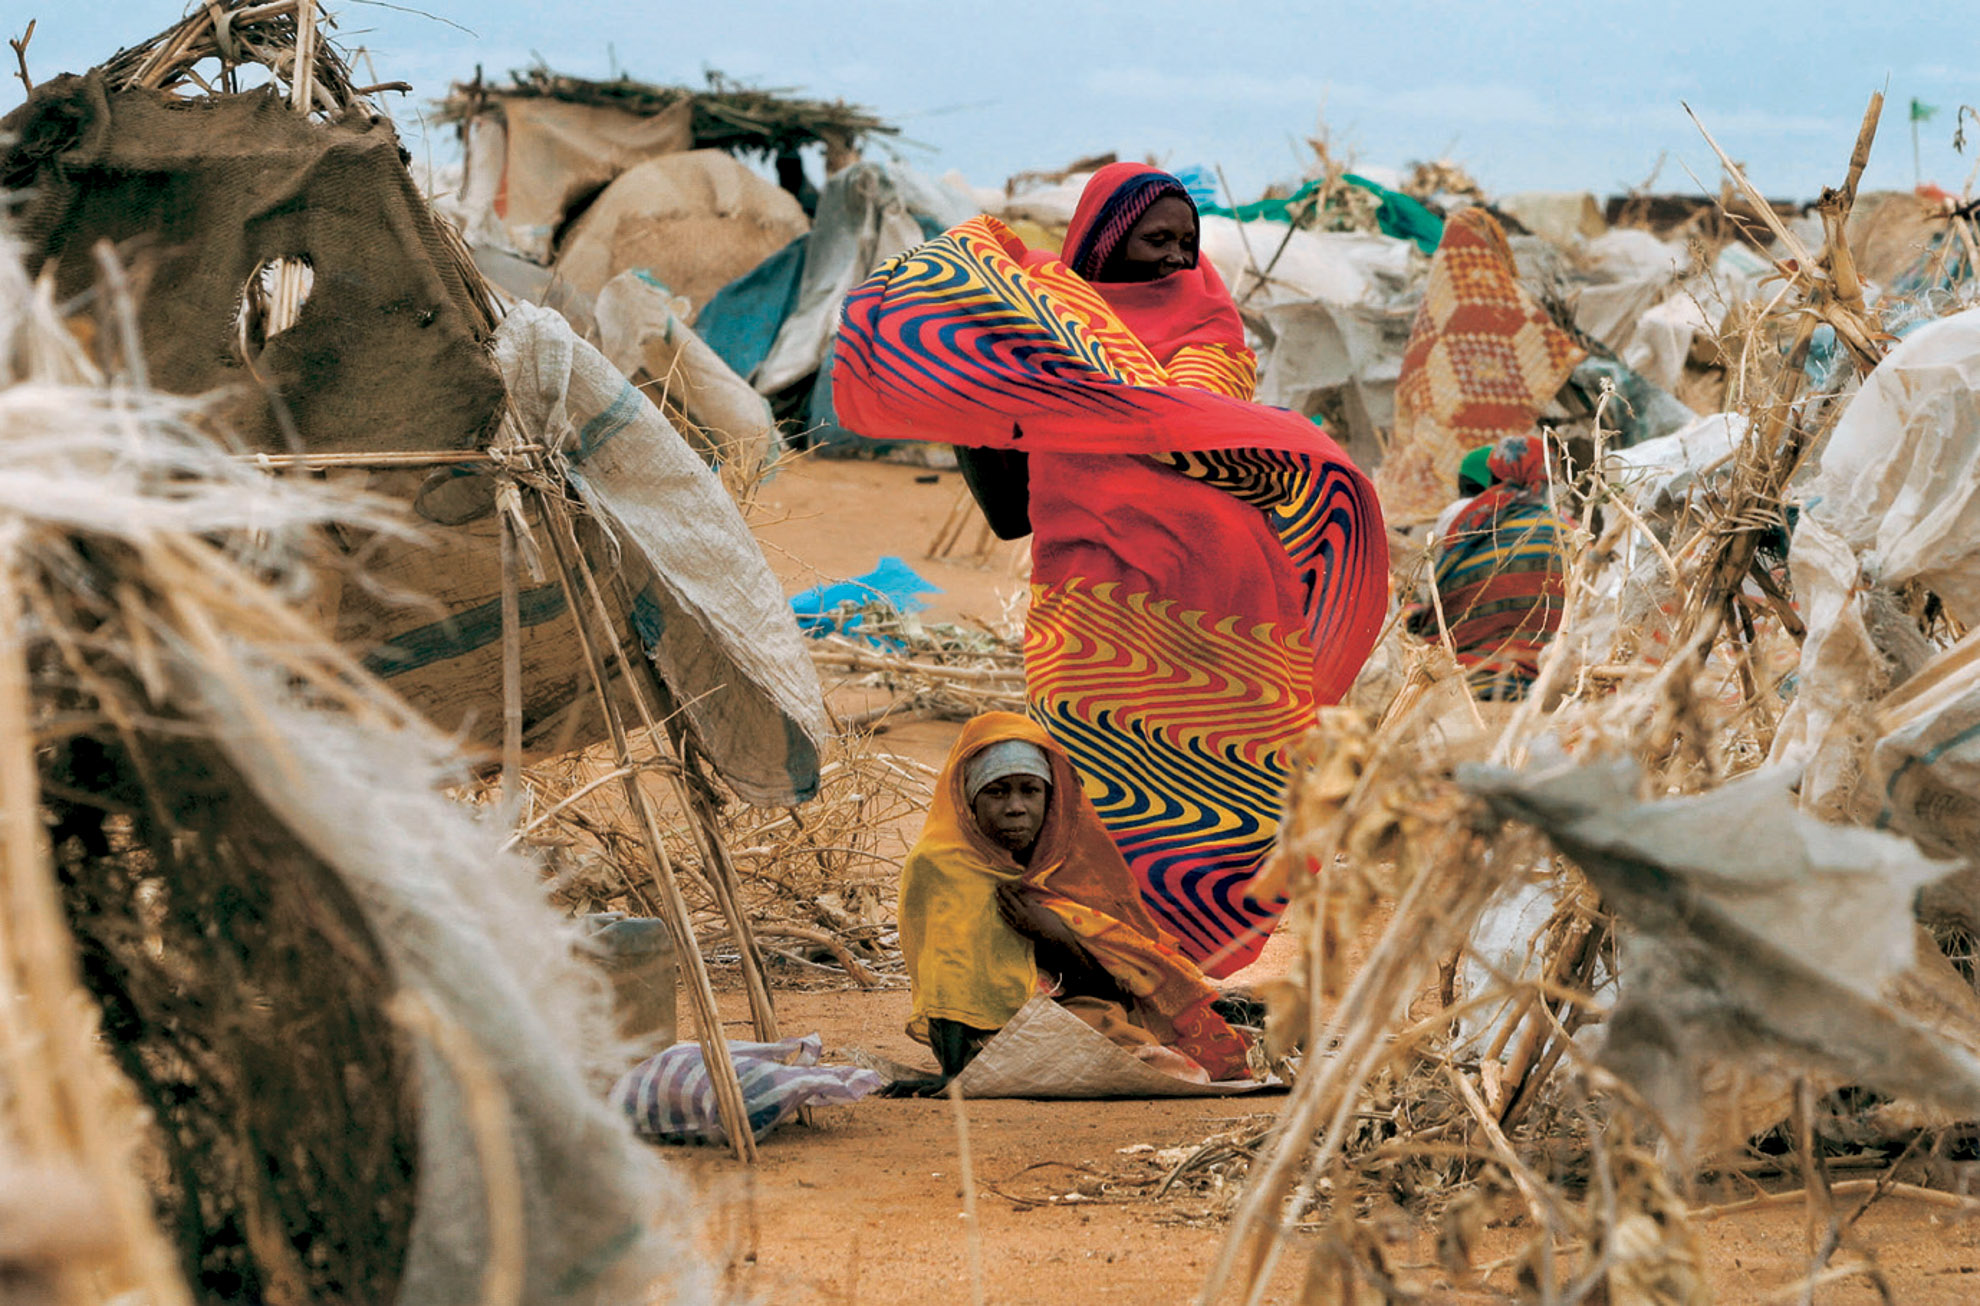 The woman's colourful clothing contrasts with the conditions in which she has been forced to live alongside refugees in the Otash camp for internally displaced persons (IDPs) in South Darfur, Sudan